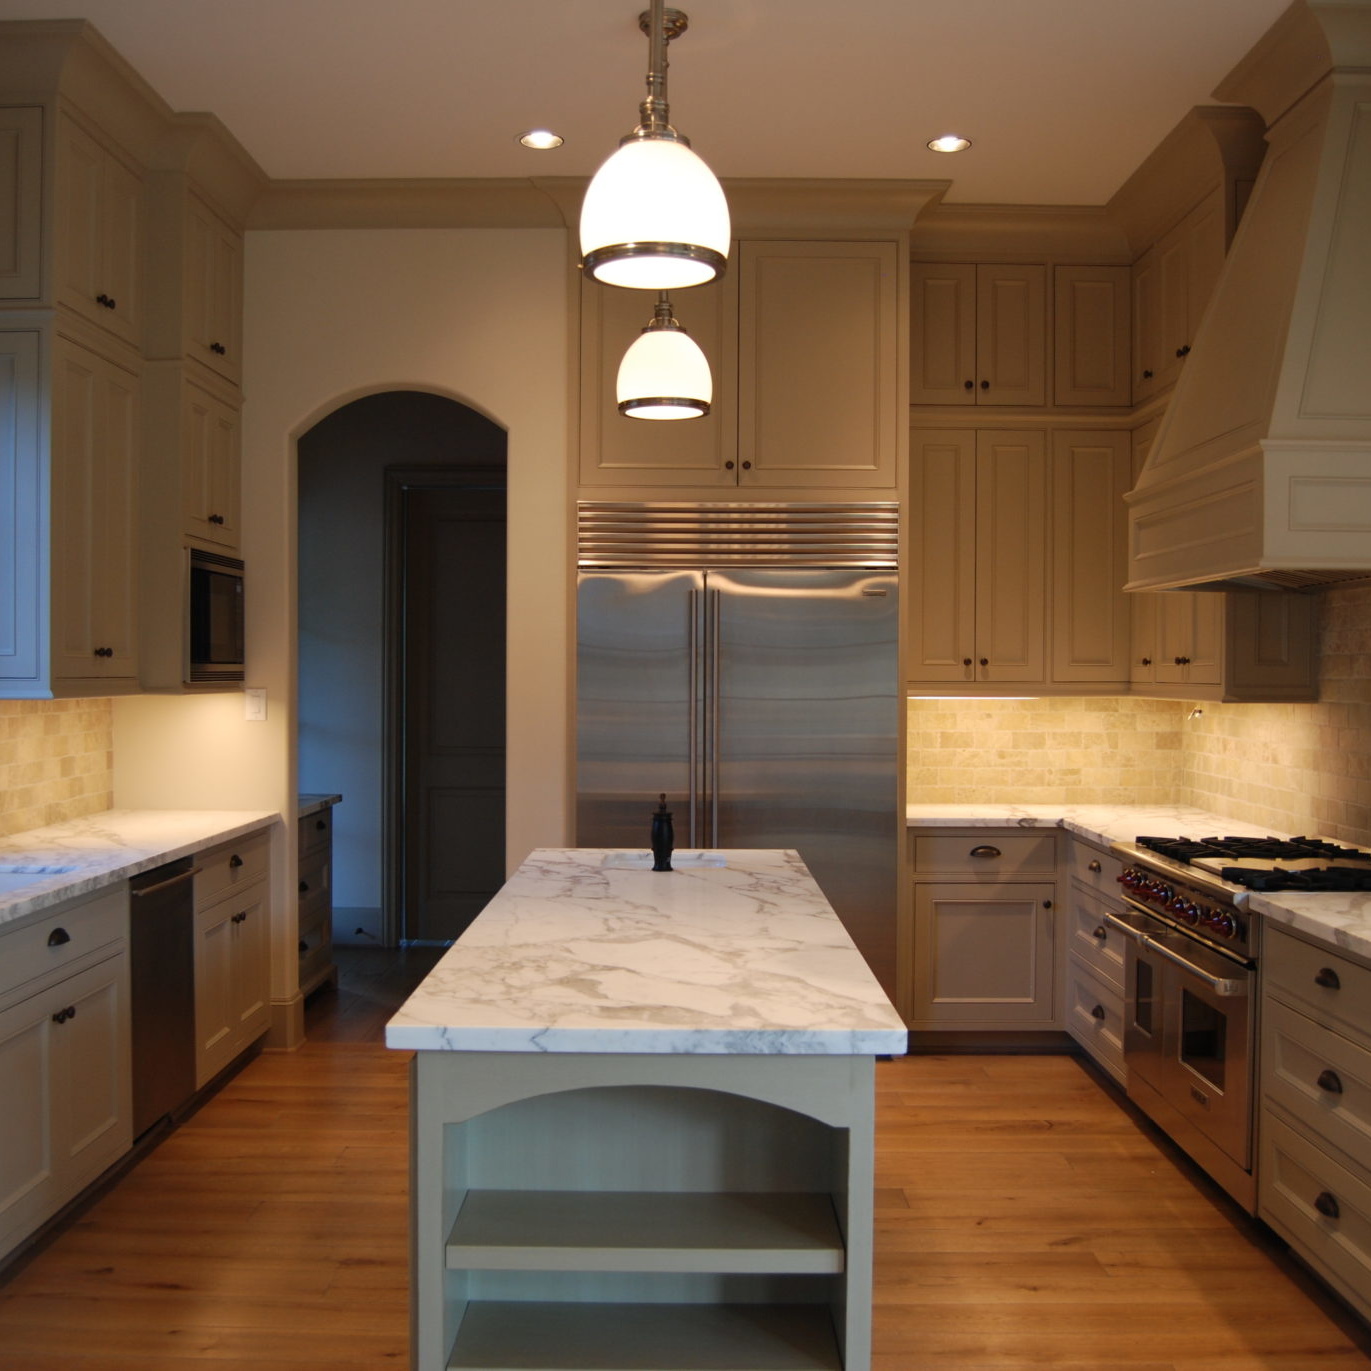 Newly remodeled kitchen with white marble countertops